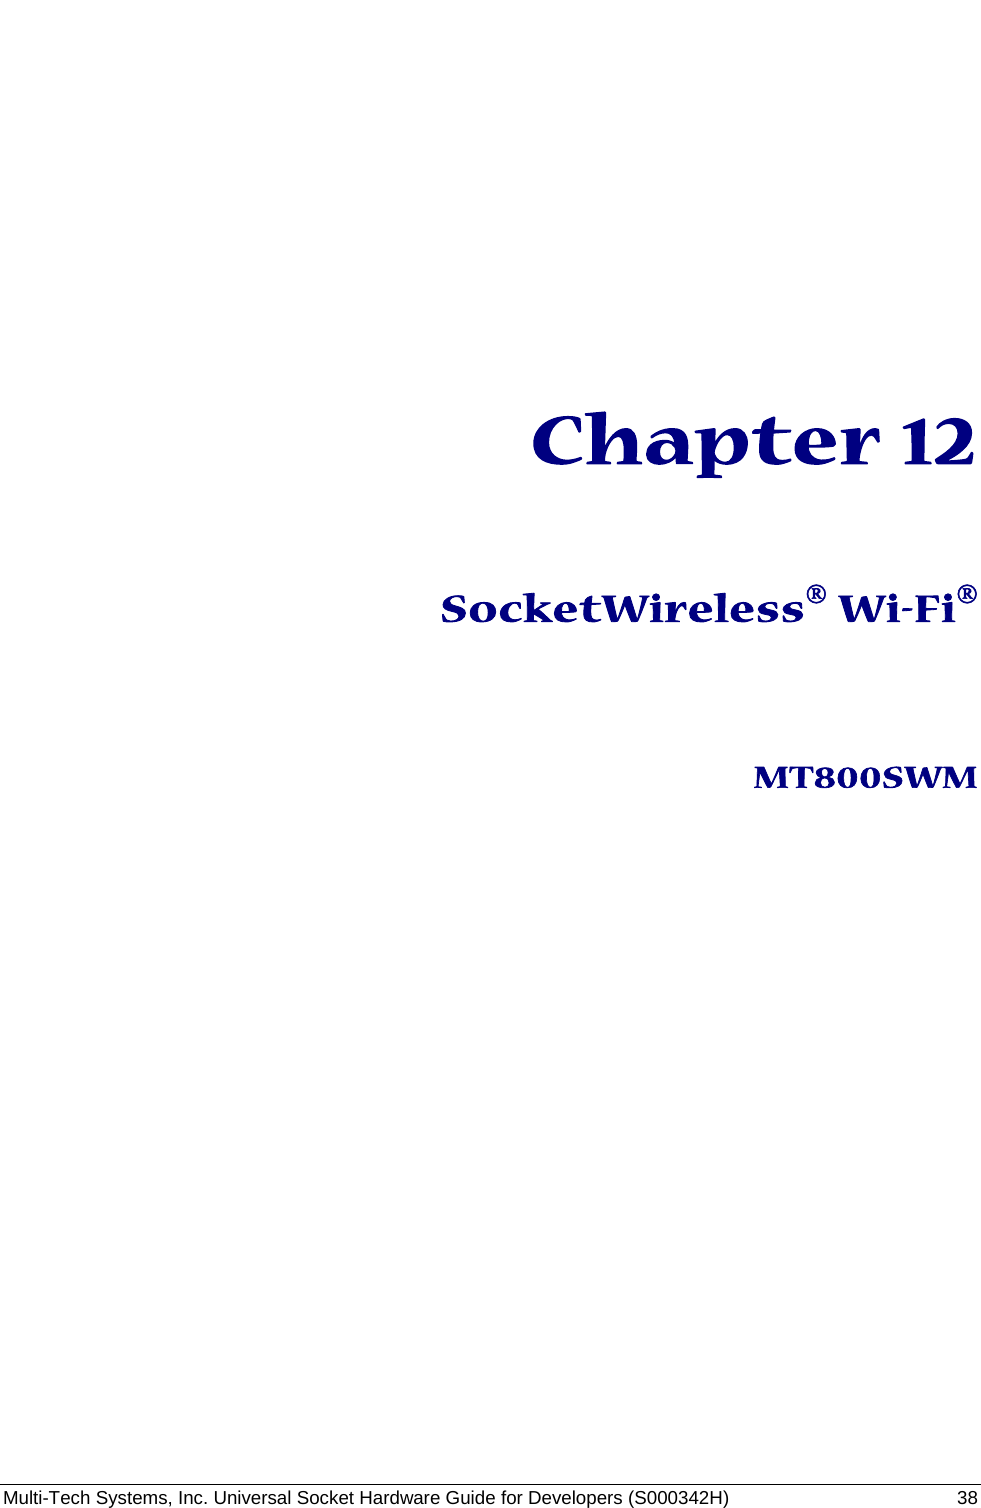  Multi-Tech Systems, Inc. Universal Socket Hardware Guide for Developers (S000342H)  38        Chapter 12    SocketWireless® Wi-Fi®    MT800SWM    